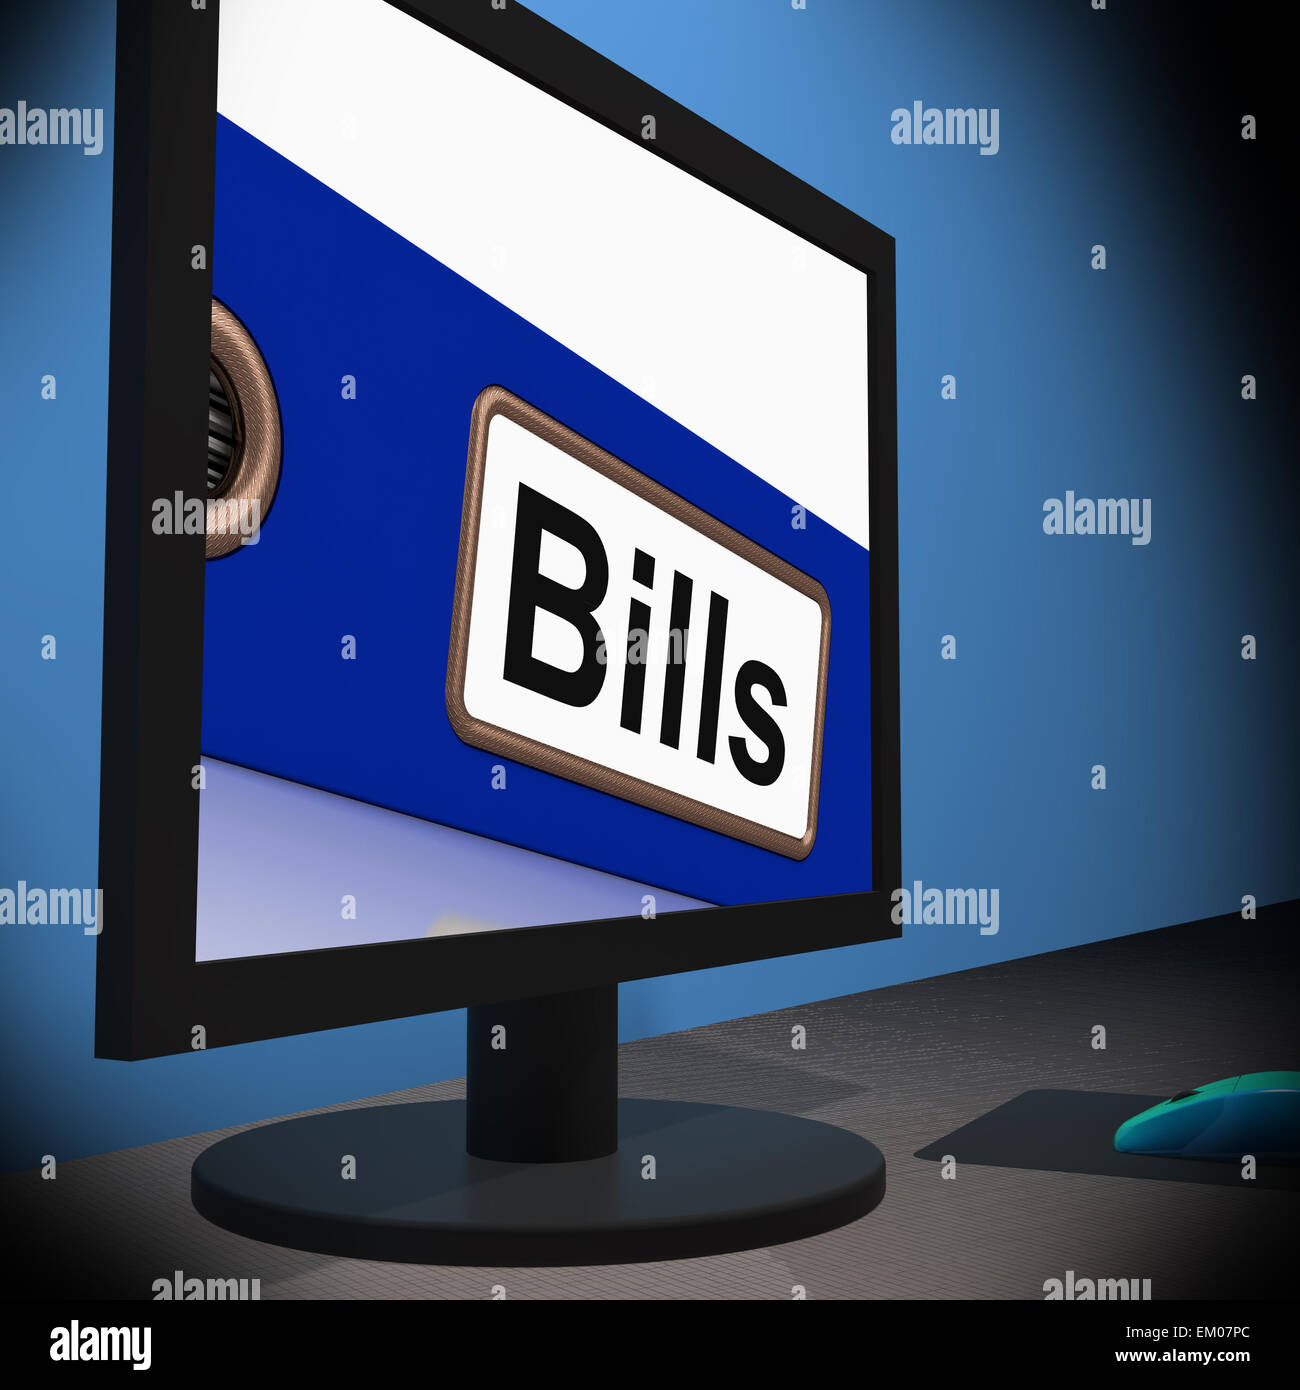 Bills On Monitor Showing Paying Expenses Stock Photo